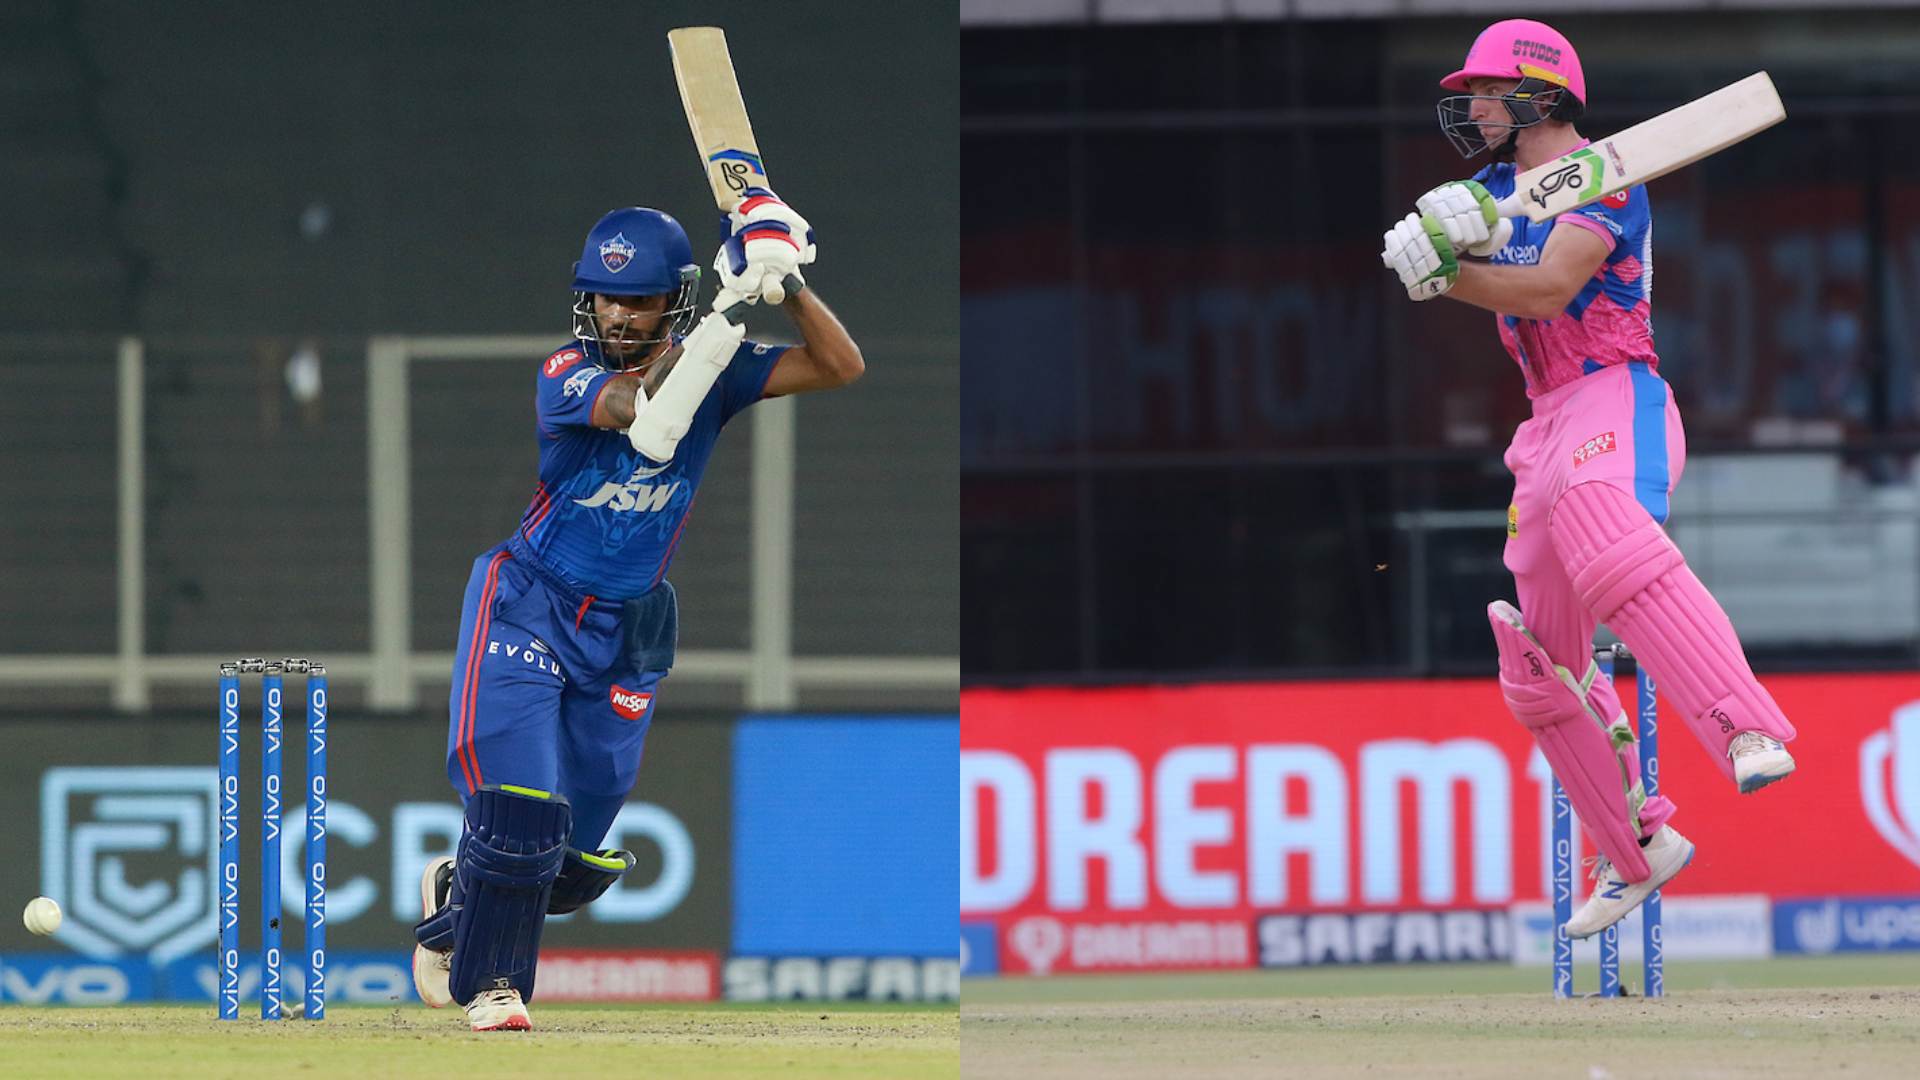 Rajasthan Royals and Delhi Capitals were boosted by Jos Buttler and Shikhar Dhawan.